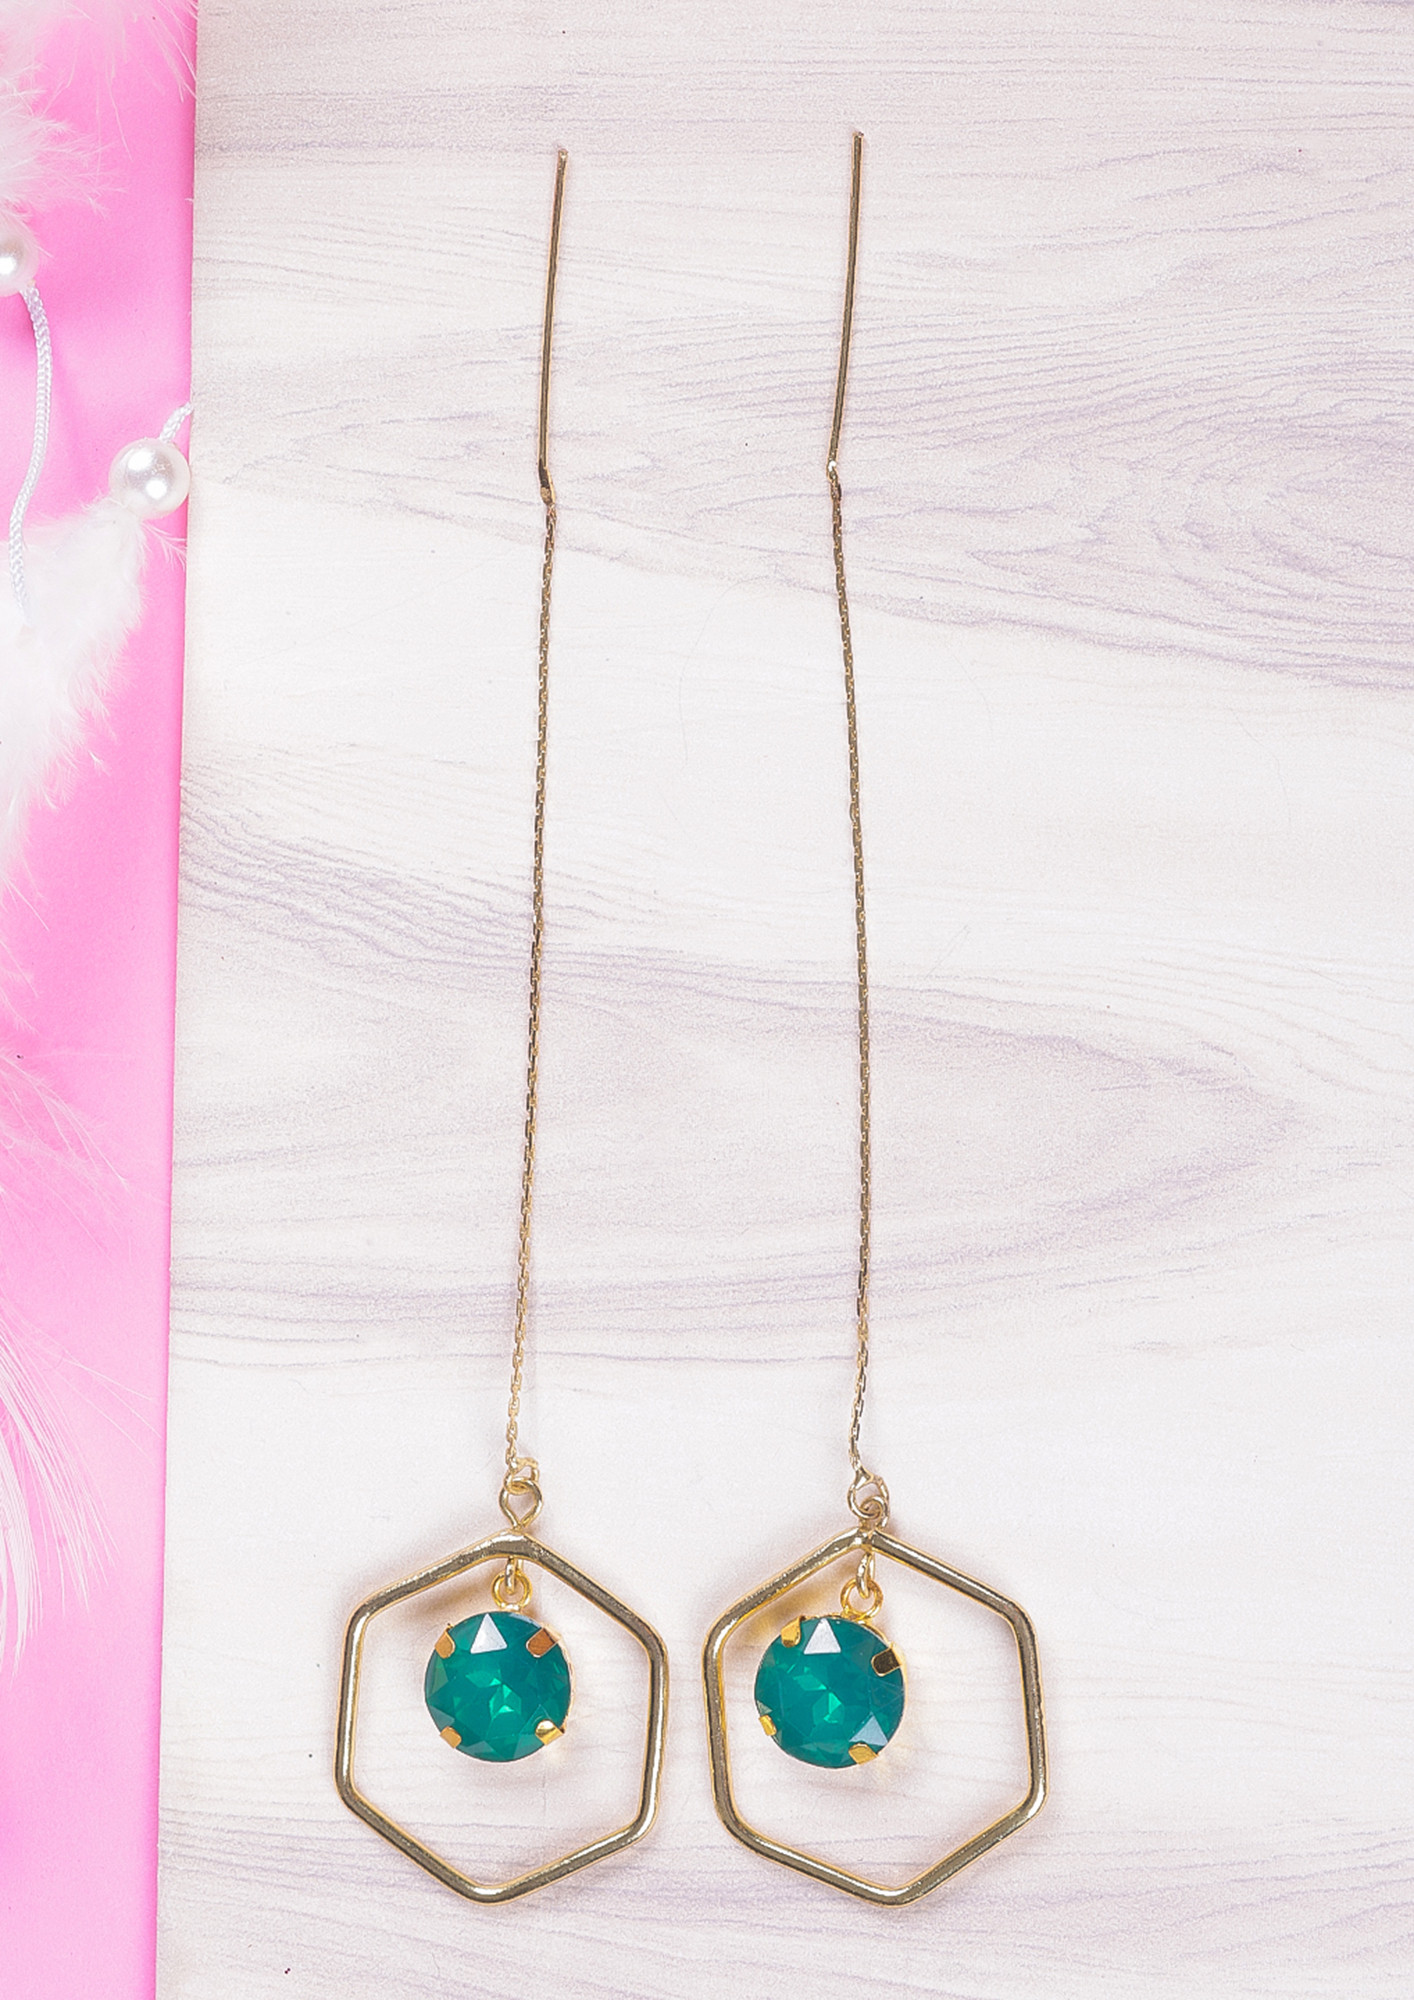 Women Amazing Rose Gold-Plated Teal Drop Earrings